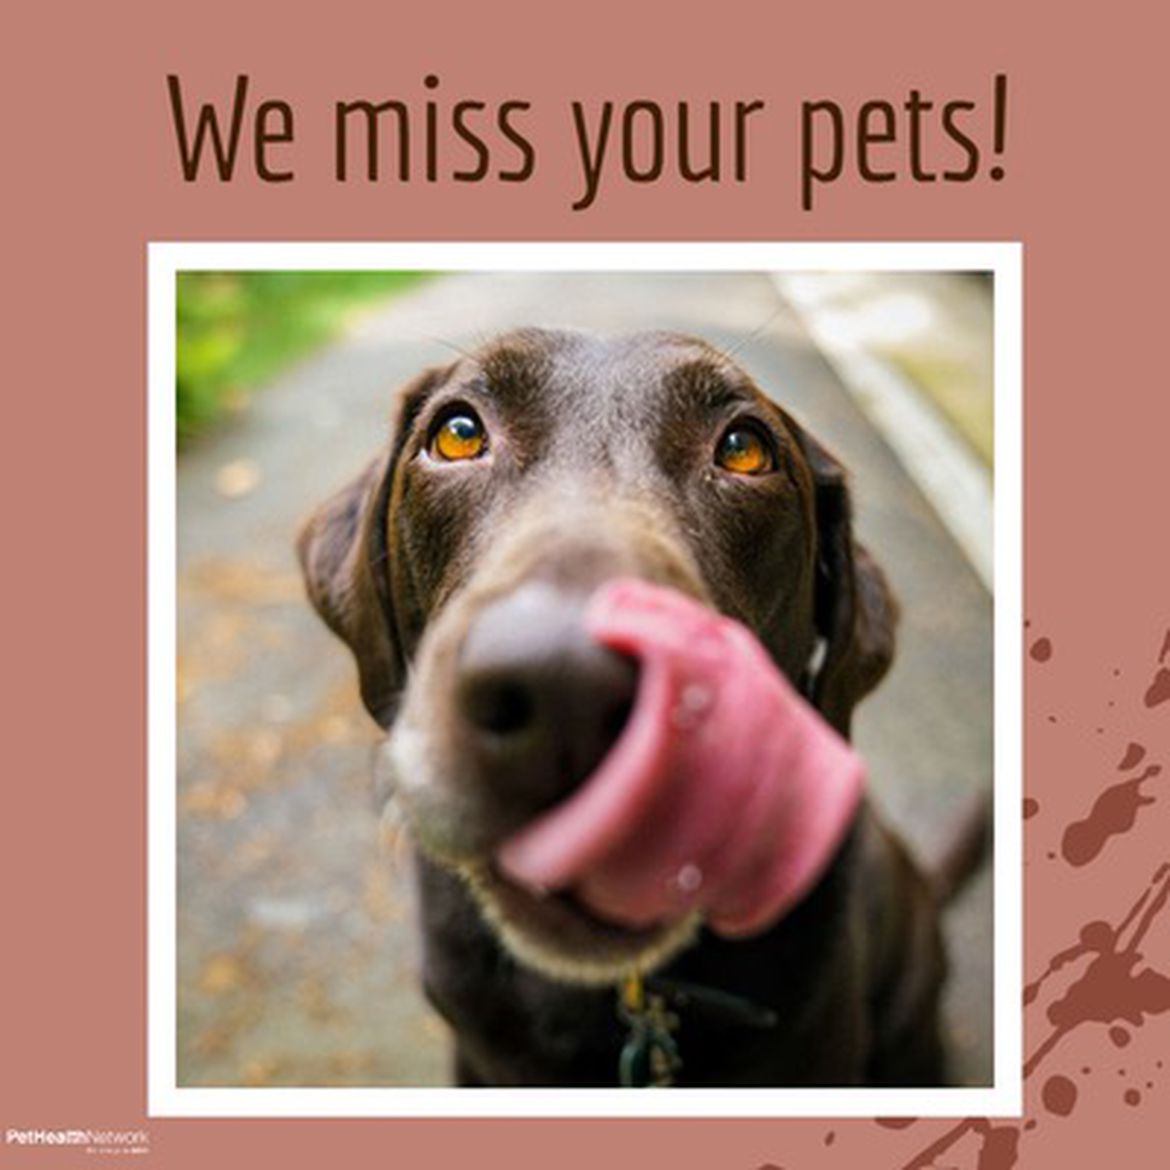 Social media post for veterinary practices to share about how they miss their clients' pets.